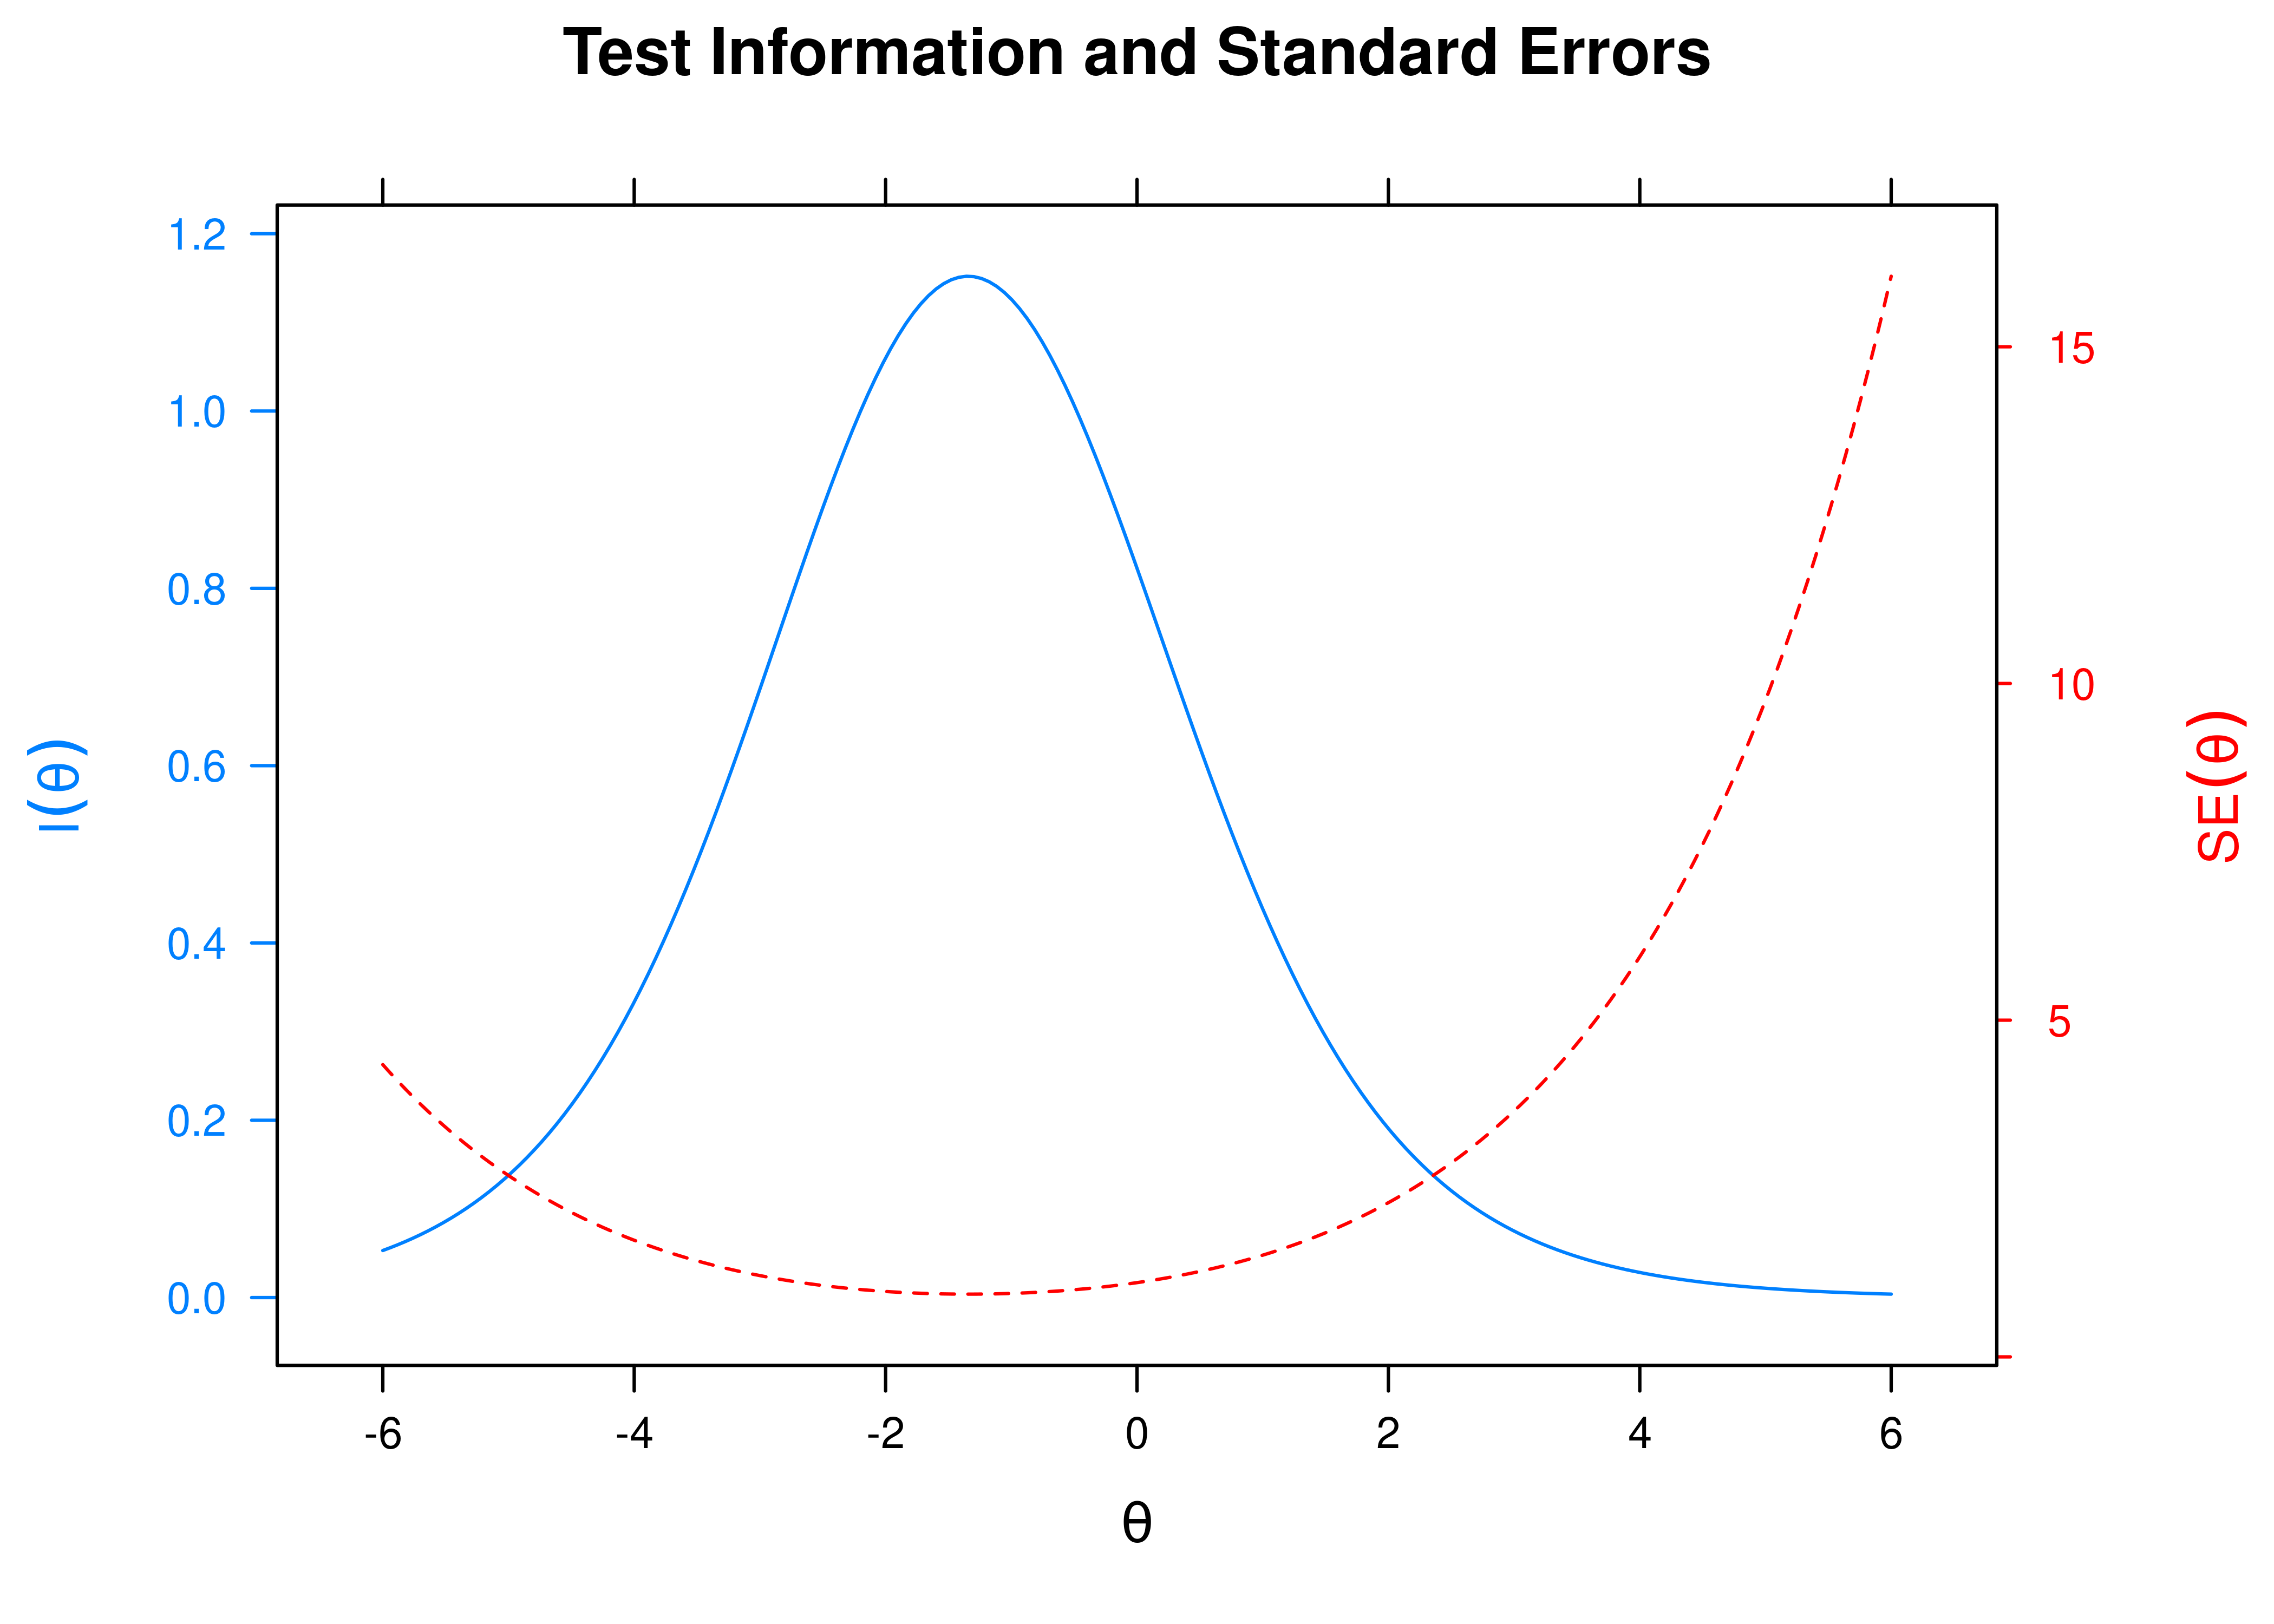 Test Information Curve and Standard Error of Measurement From Rasch Item Response Theory Model.